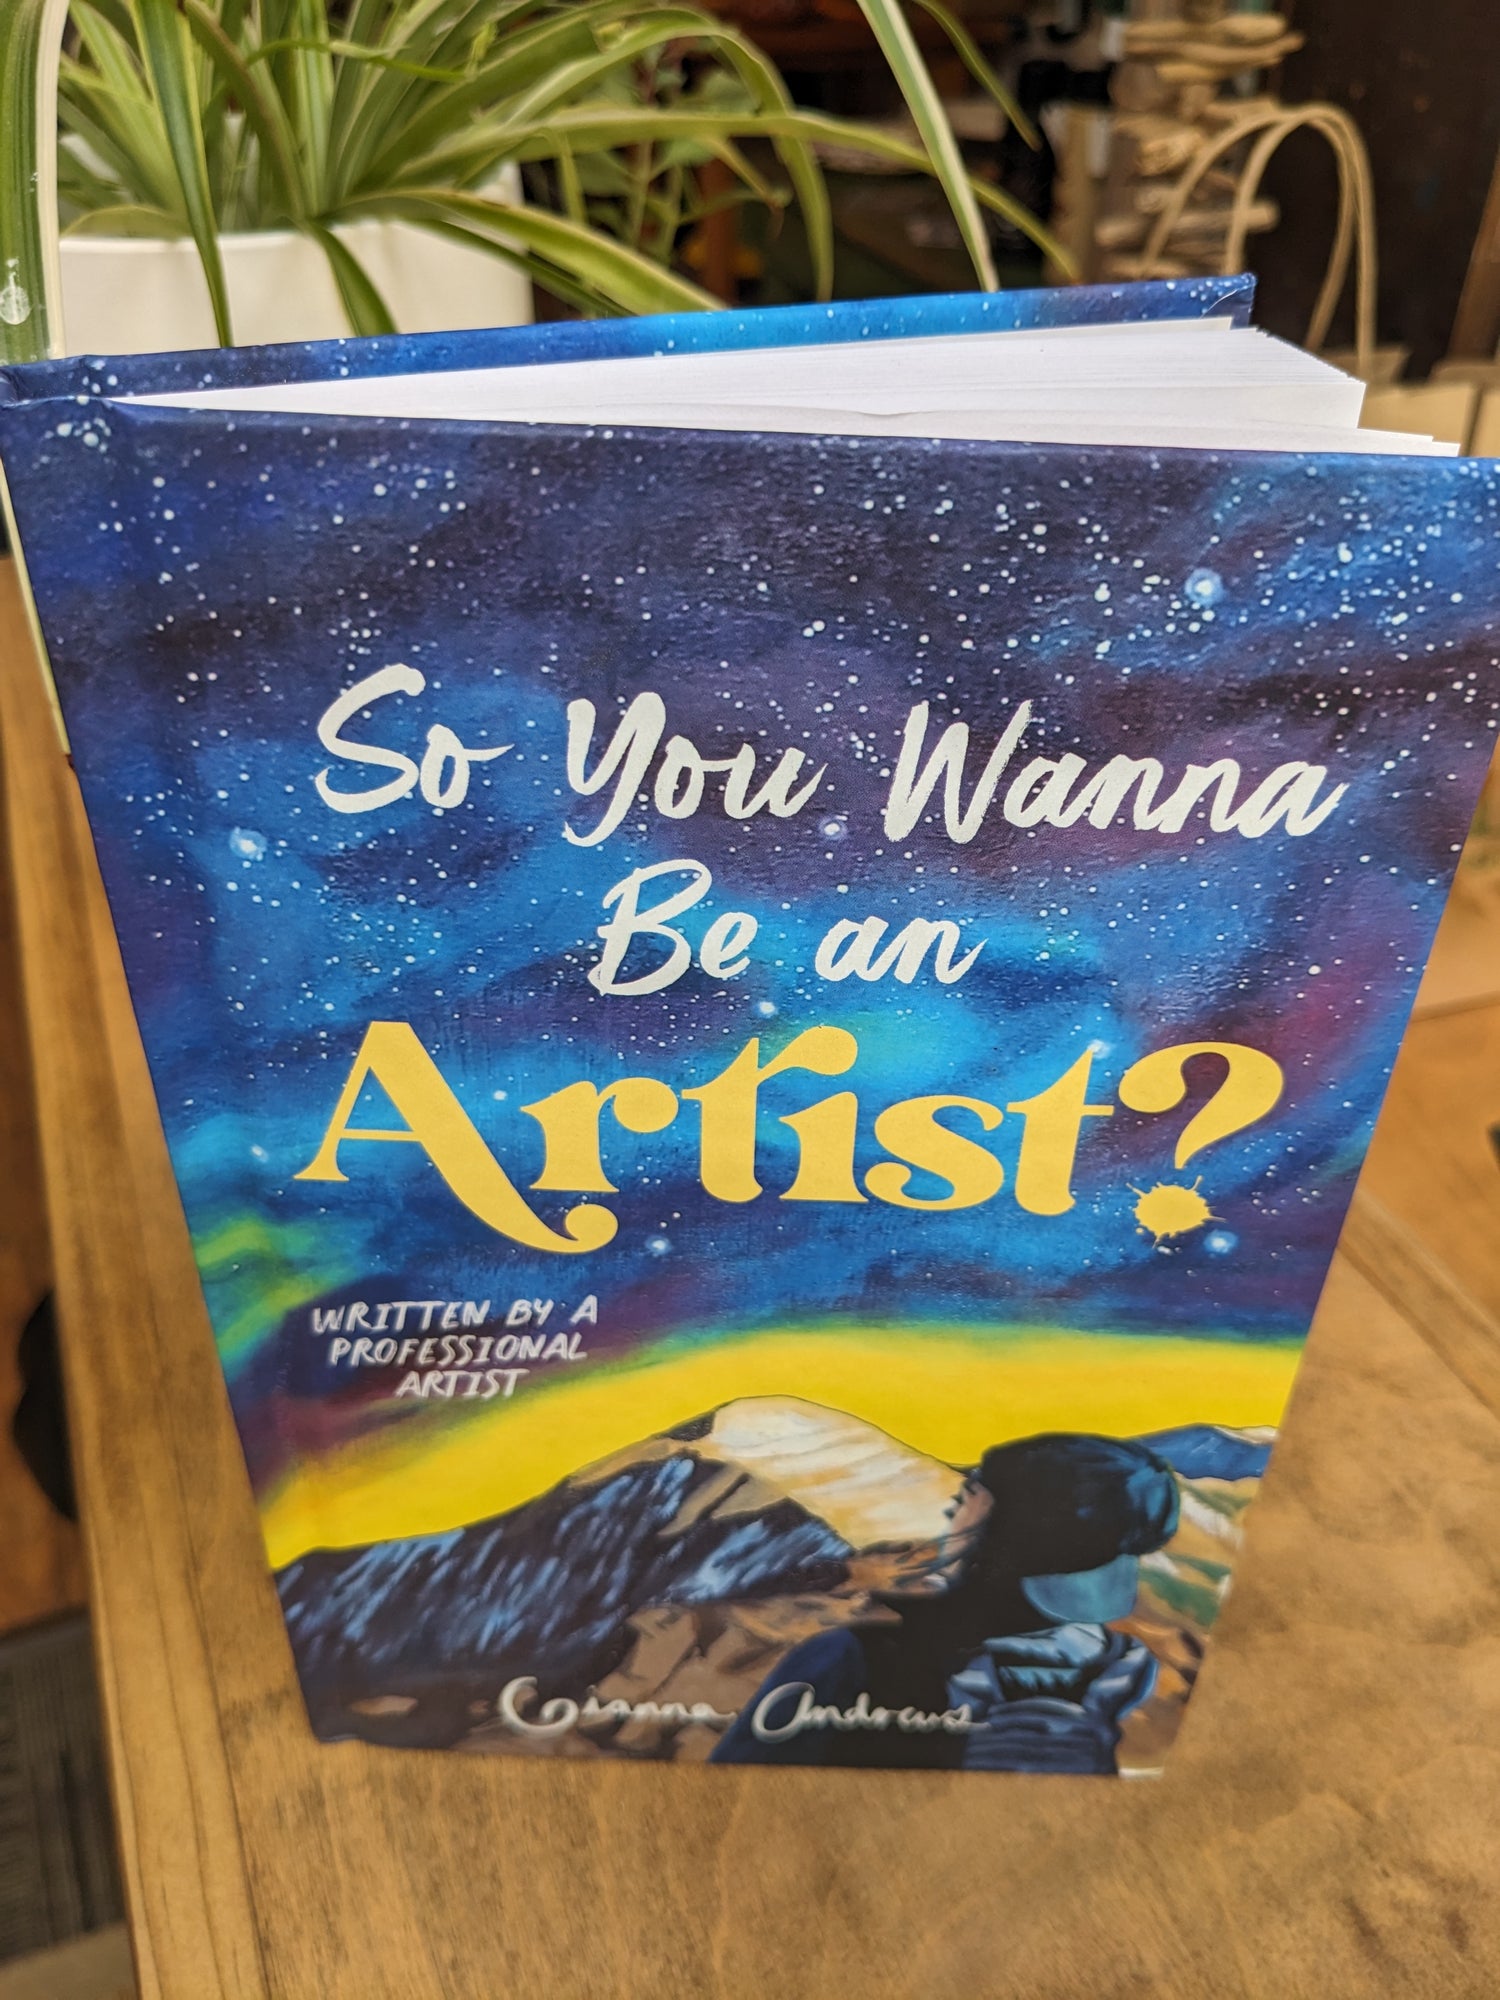 Front of Gianna Andrews' book "So You Want to Be An Artist" from top view